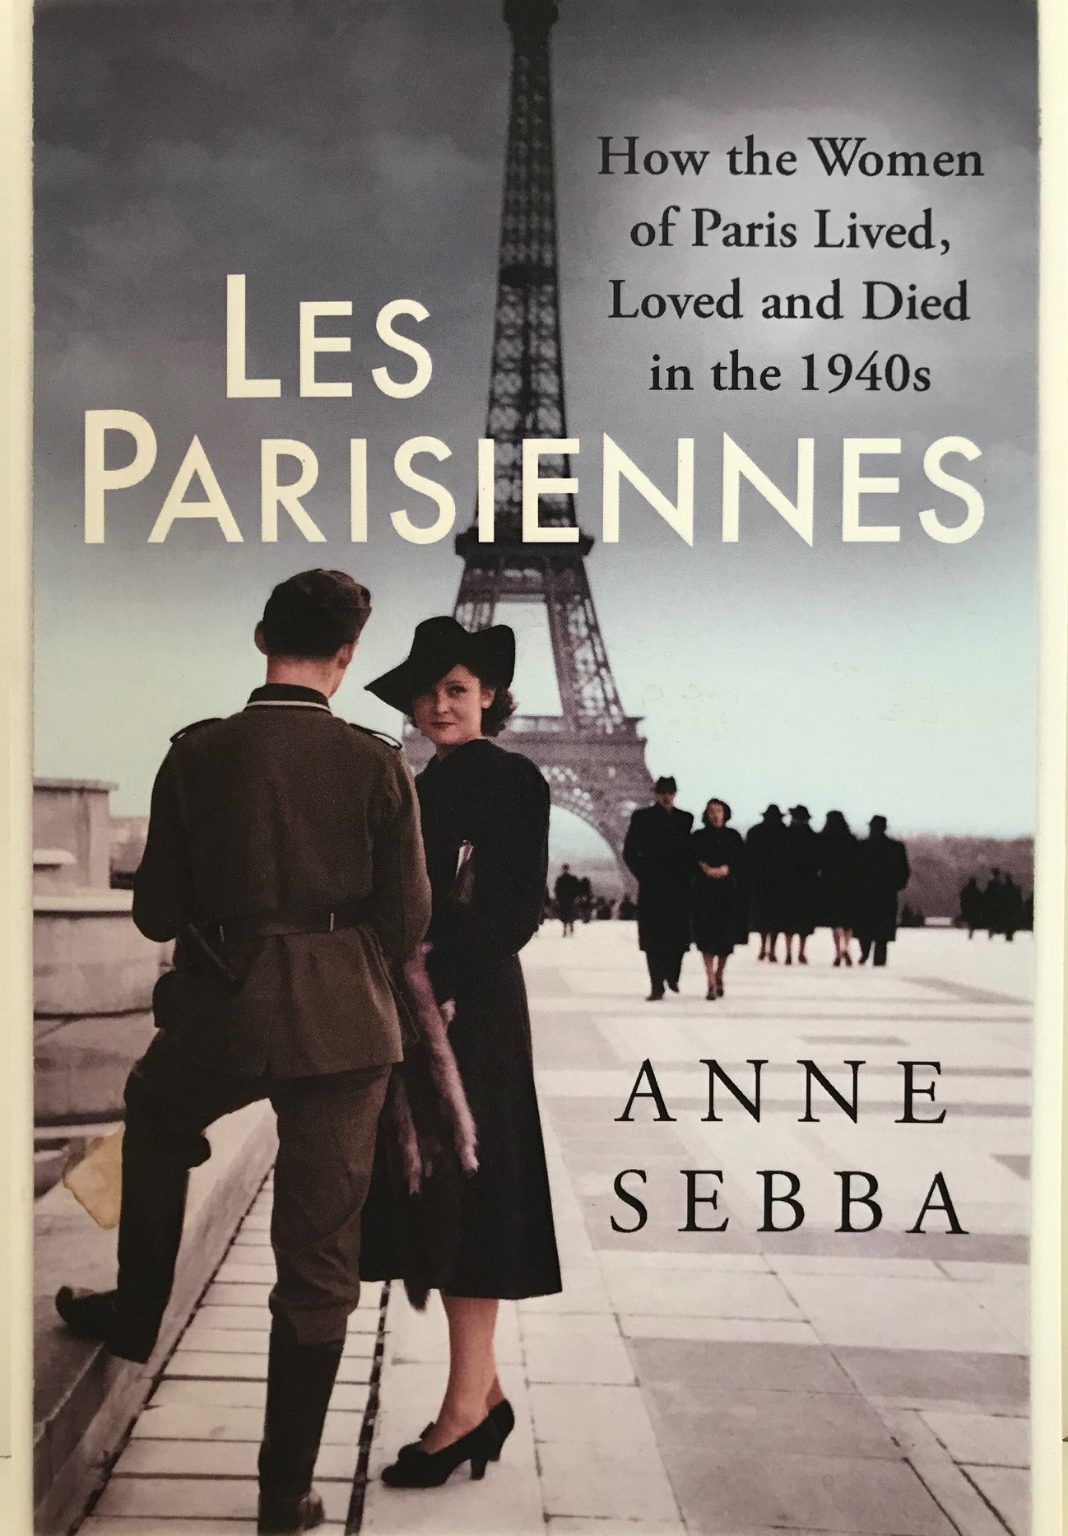 LES PARISIENNES: How the Women of Paris Lived, Loved, and Died in the 1940s